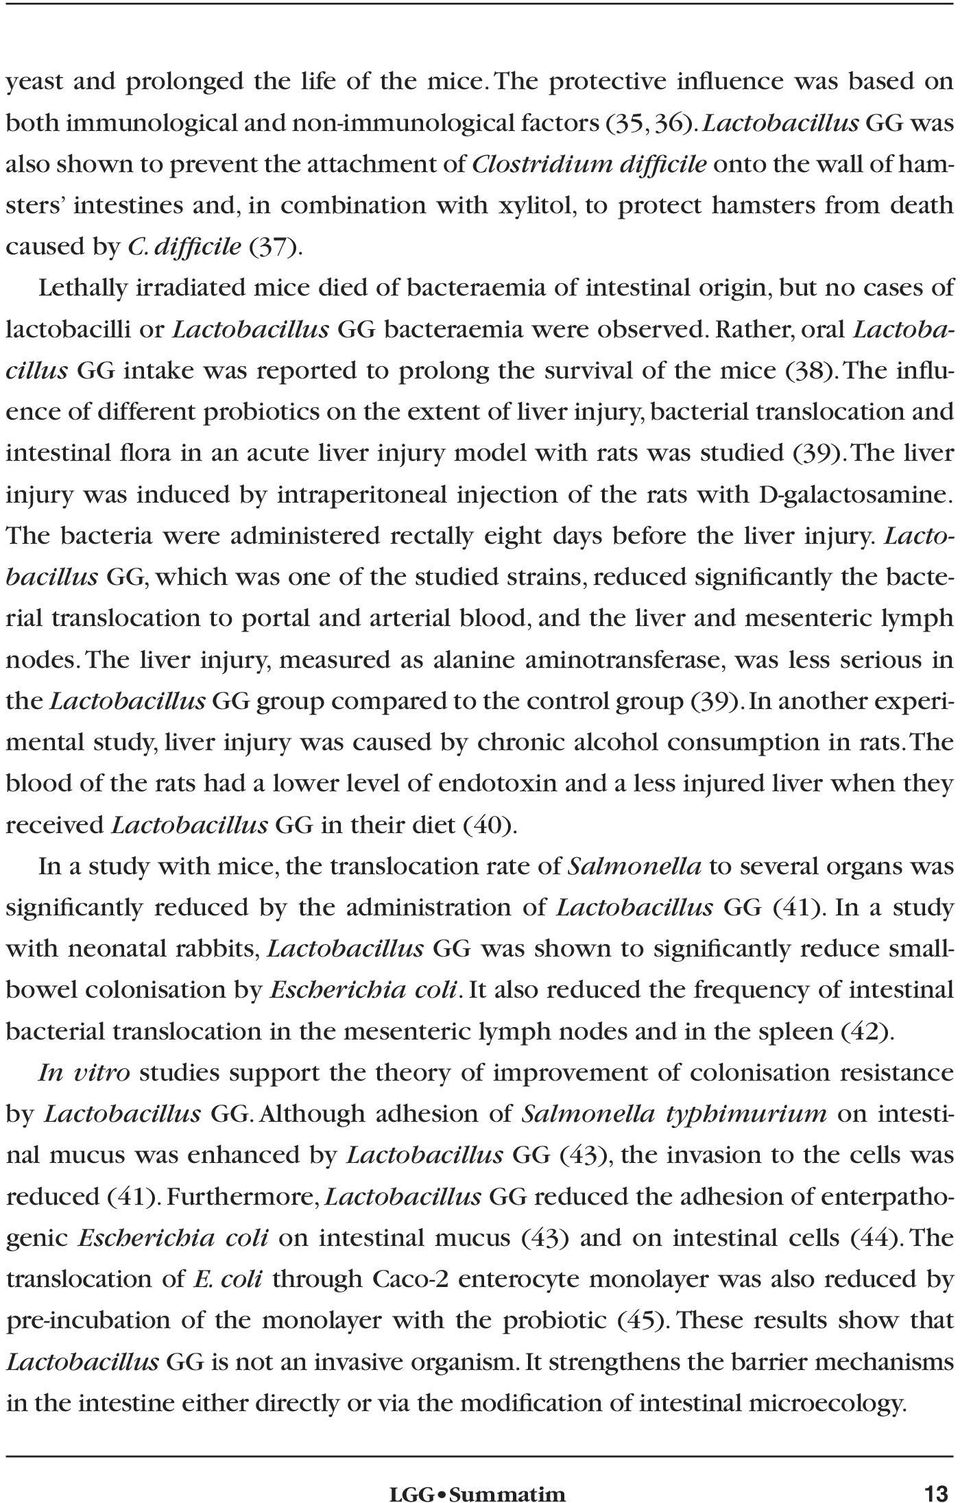 difficile (37). Lethally irradiated mice died of bacteraemia of intestinal origin, but no cases of lactobacilli or Lactobacillus GG bacteraemia were observed.